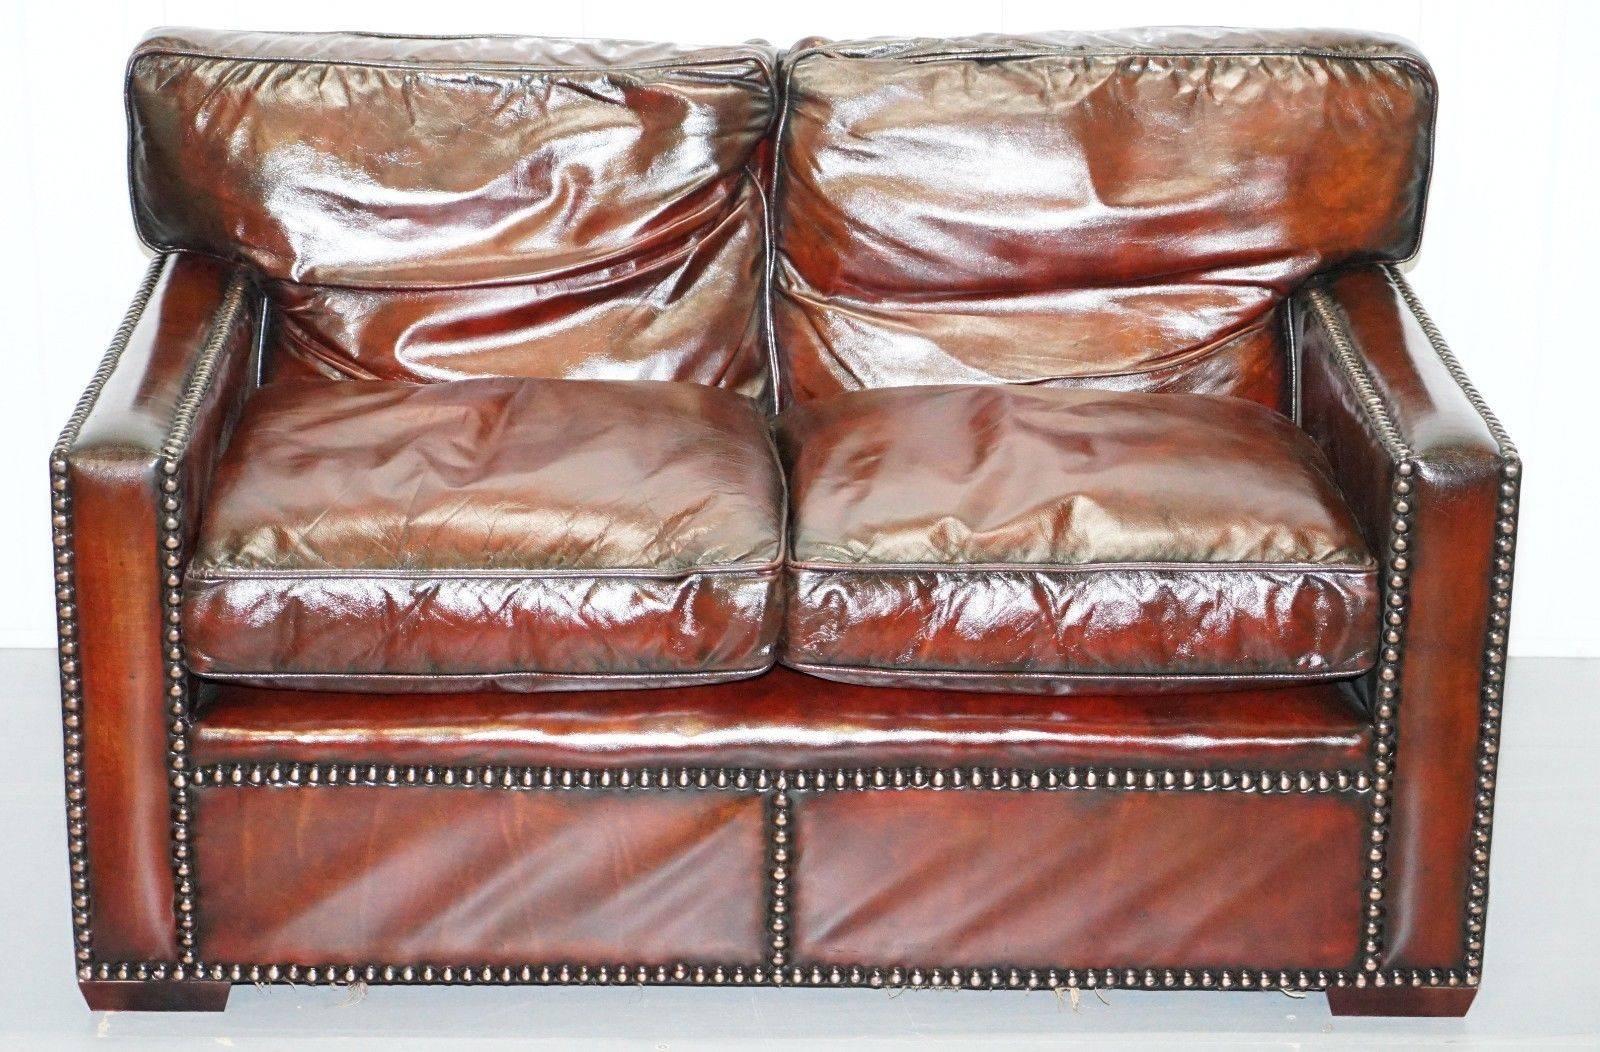 We are delighted to offer for sale this stunning fully restored Bordeaux leather Gentleman’s club sofa part of a large suite with a great history

This piece is part of a suite, all restored to the same finish and standard, I have two two-seater